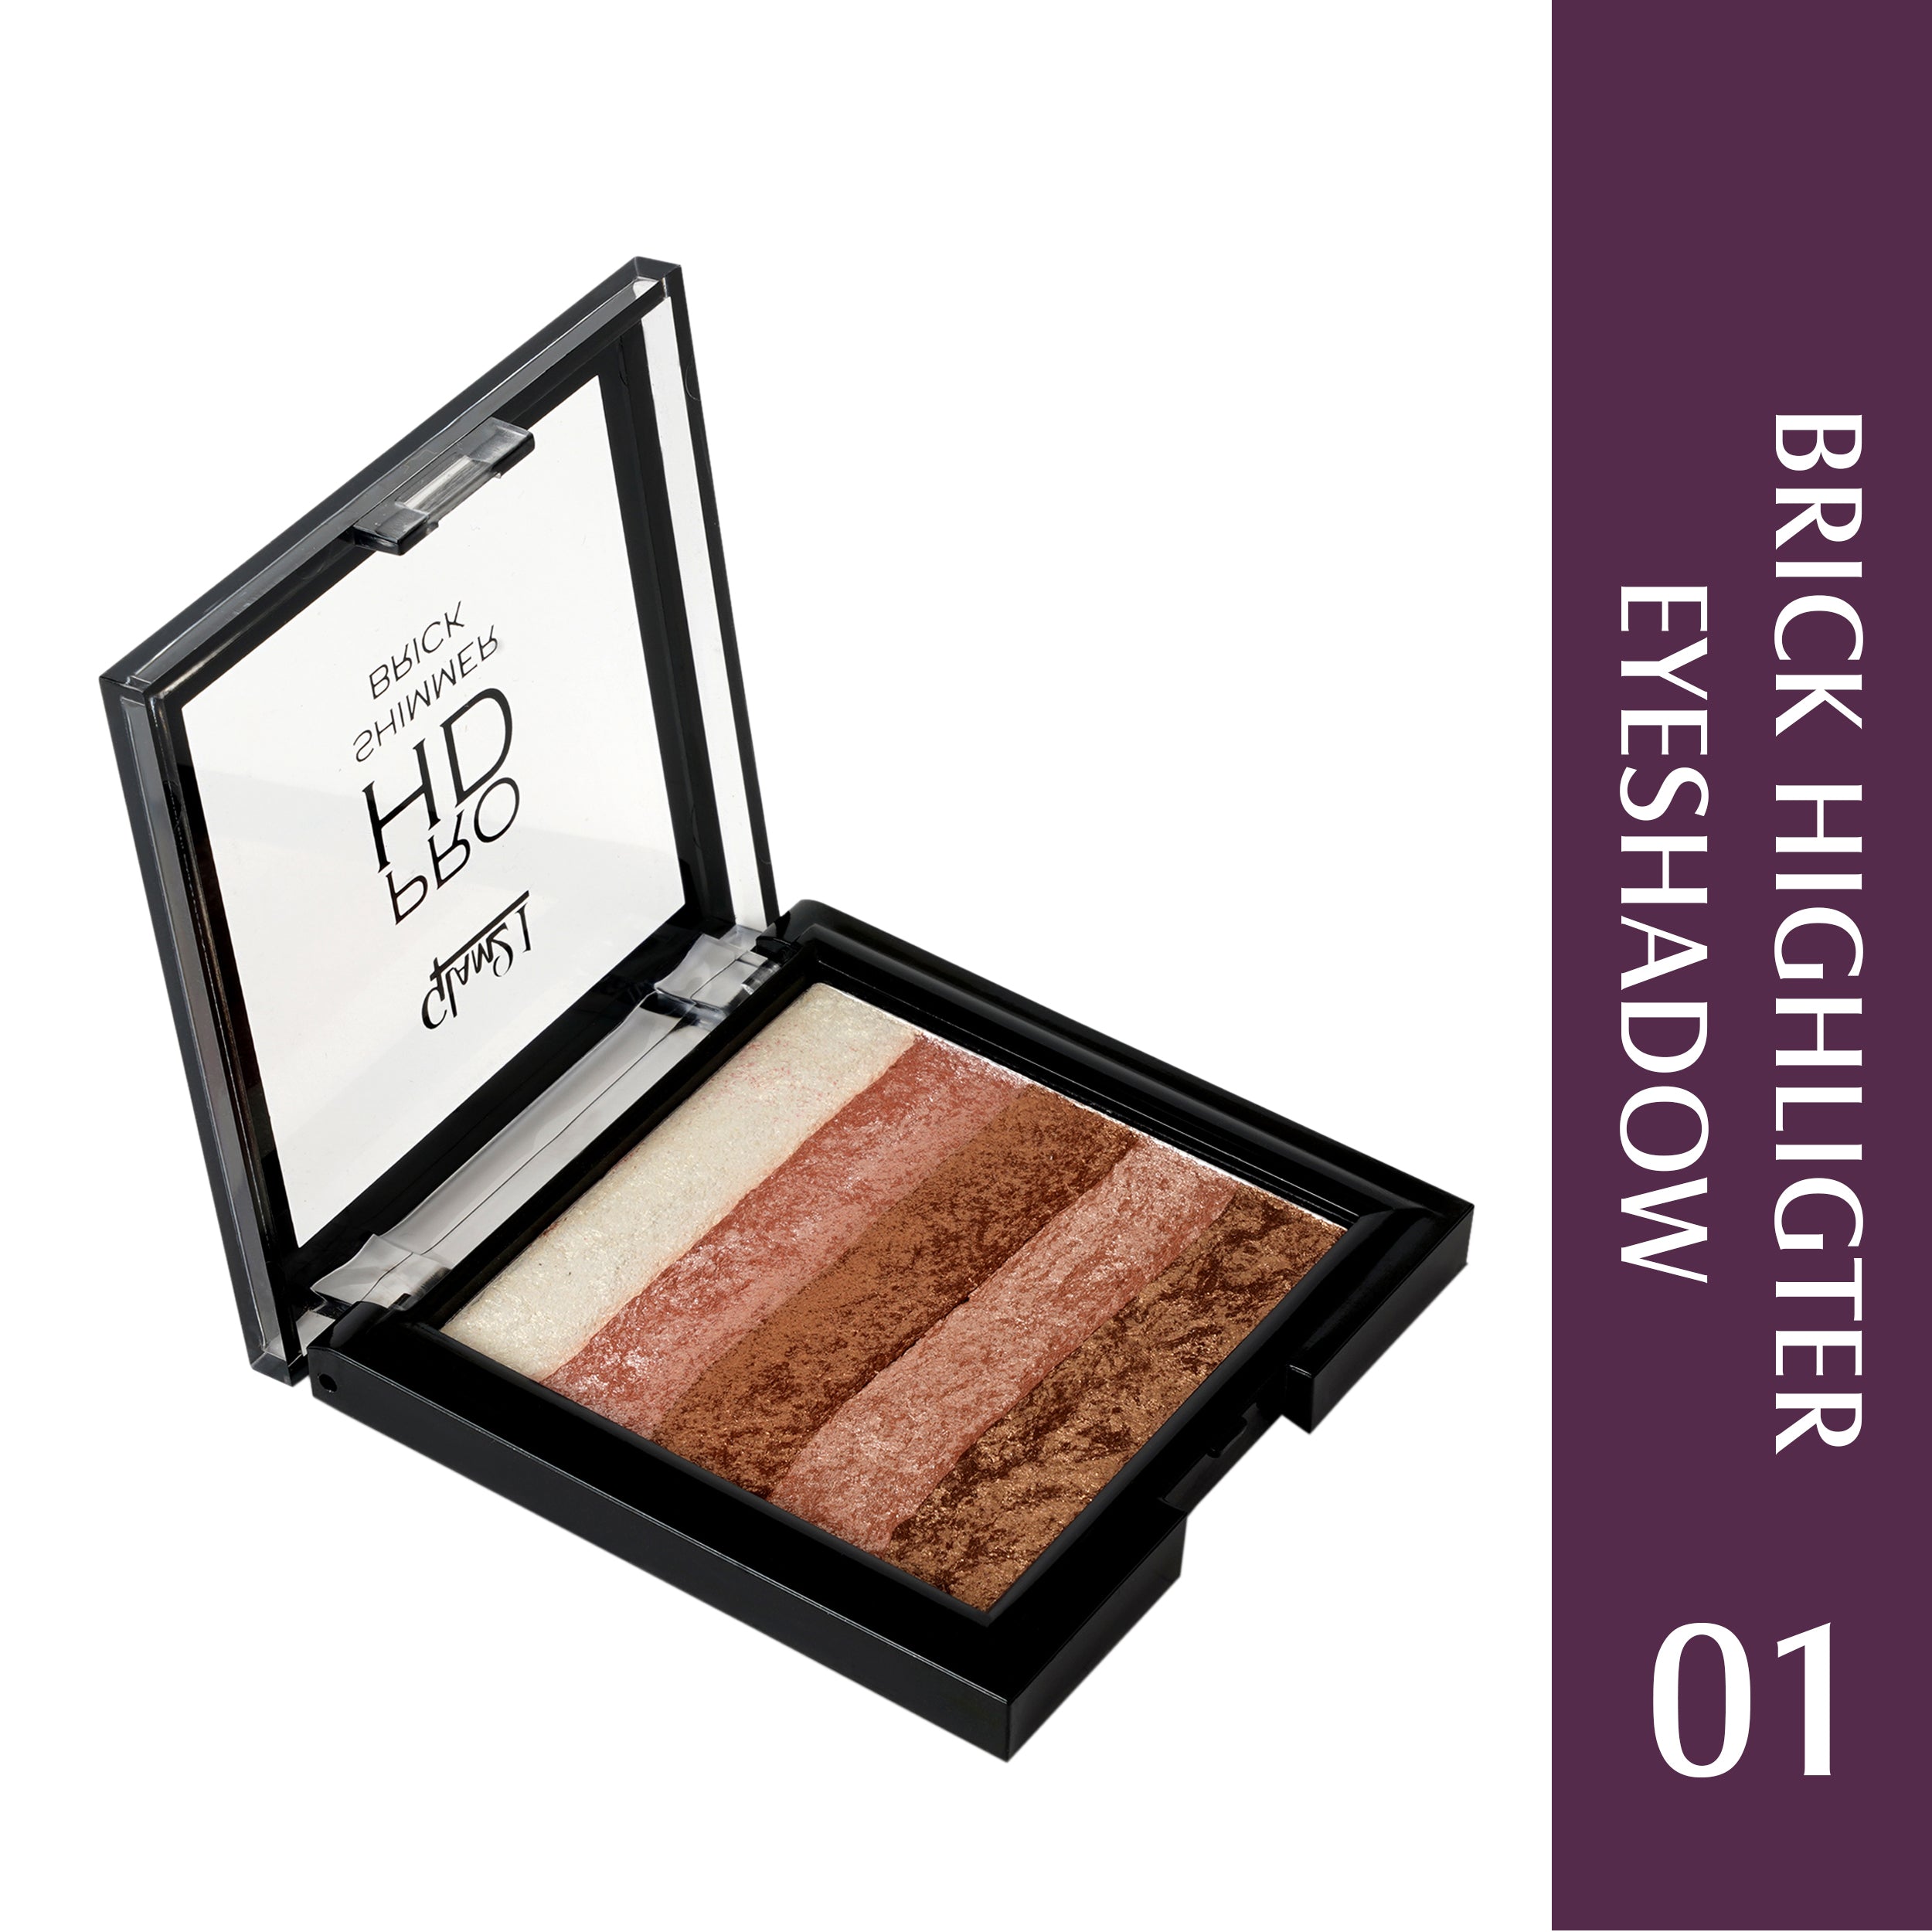 Glam21 Brick Eyeshadow Palette Long-Lasting| Shimmery Finish 5 Highly Pigmented Shades 7.5 g (Multicolor)